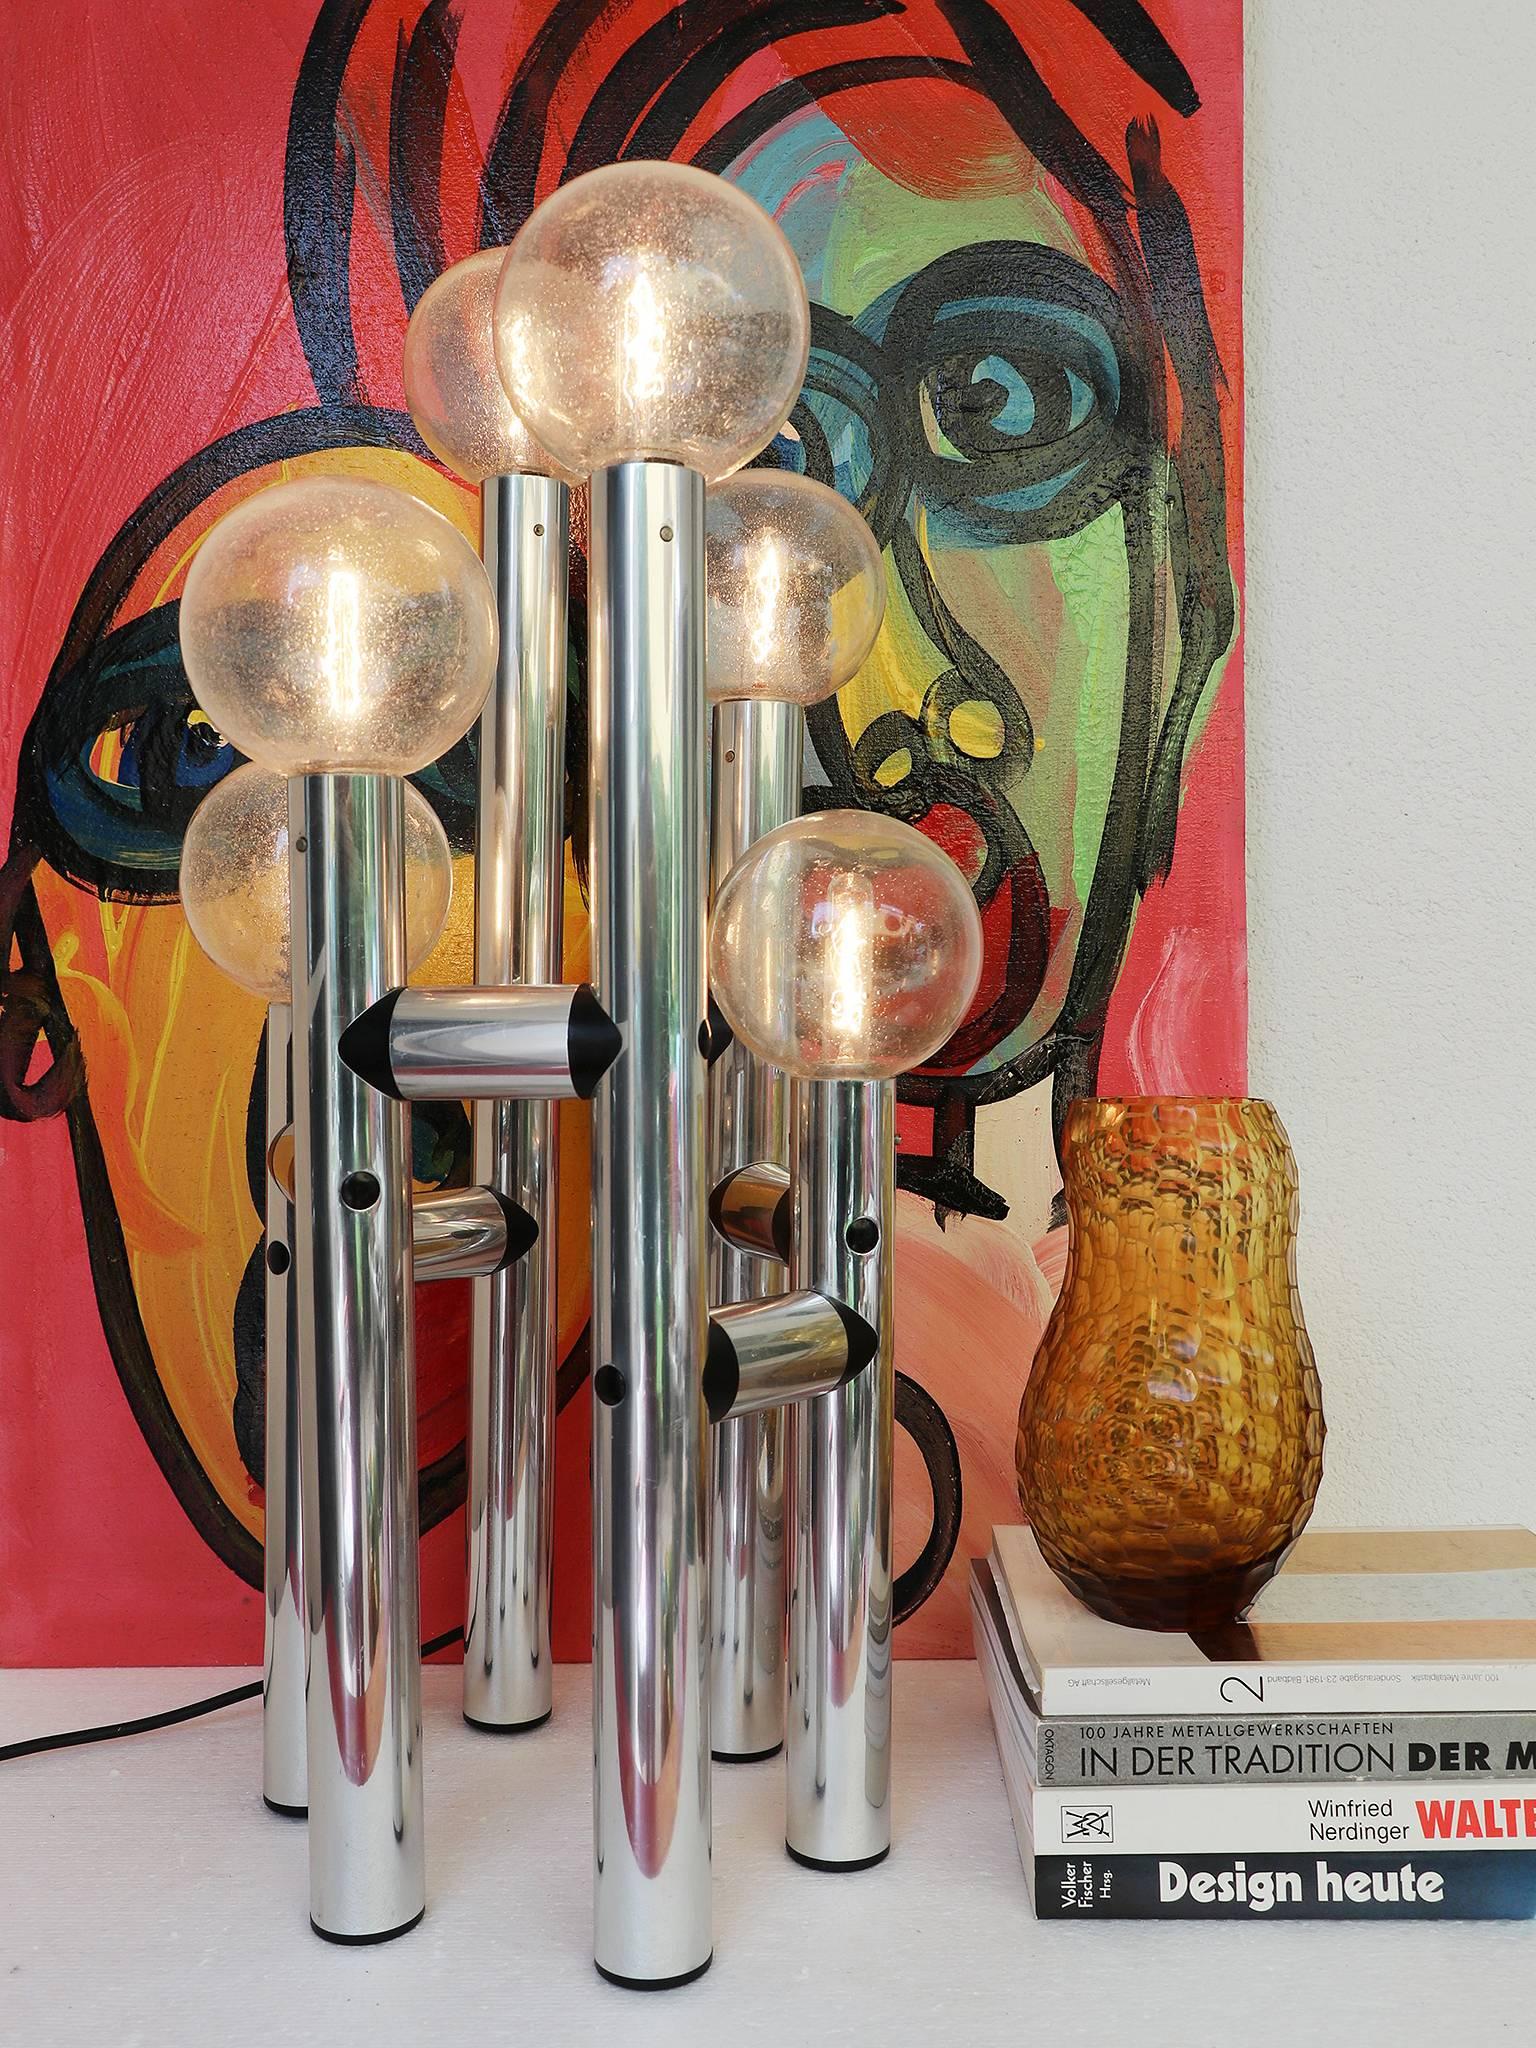 Atomium tower table or floor light mod. RS6-TL 1972 designed by J.T. Kalmar, Austria in 1972. The frame is made of polished aluminum, the original globes are made of blown glass. 

Lighting: takes six small Edisob E14 base screw bulbs. 
Condition: